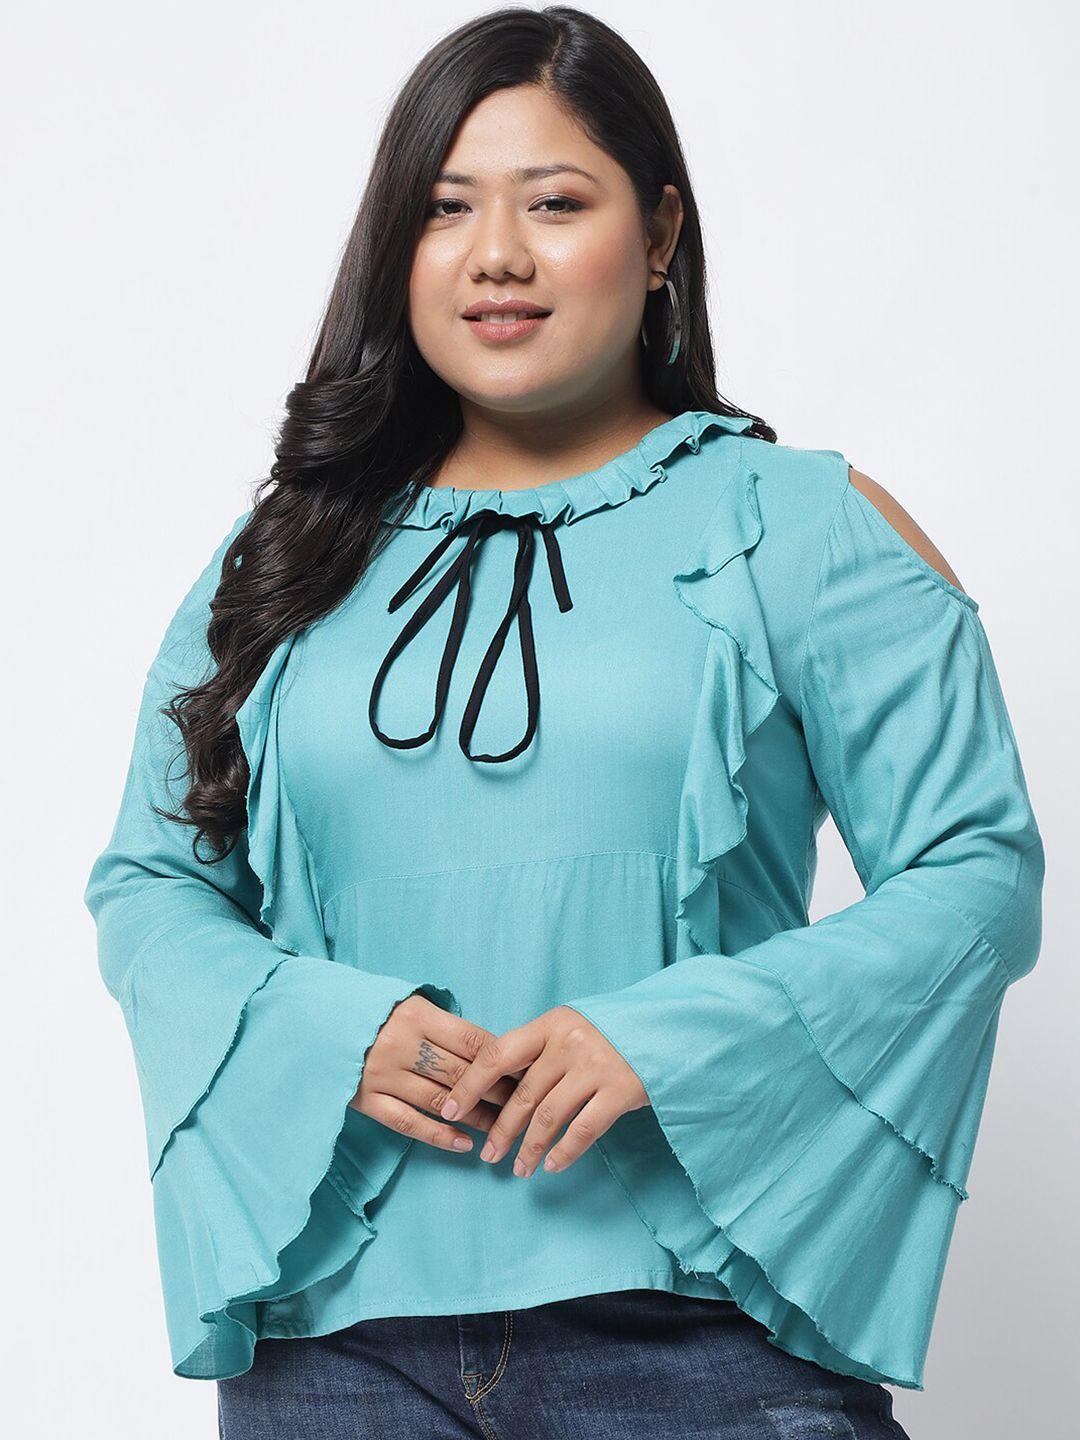 beyound size - the dry state women plus size blue tie-up neck ruffles top